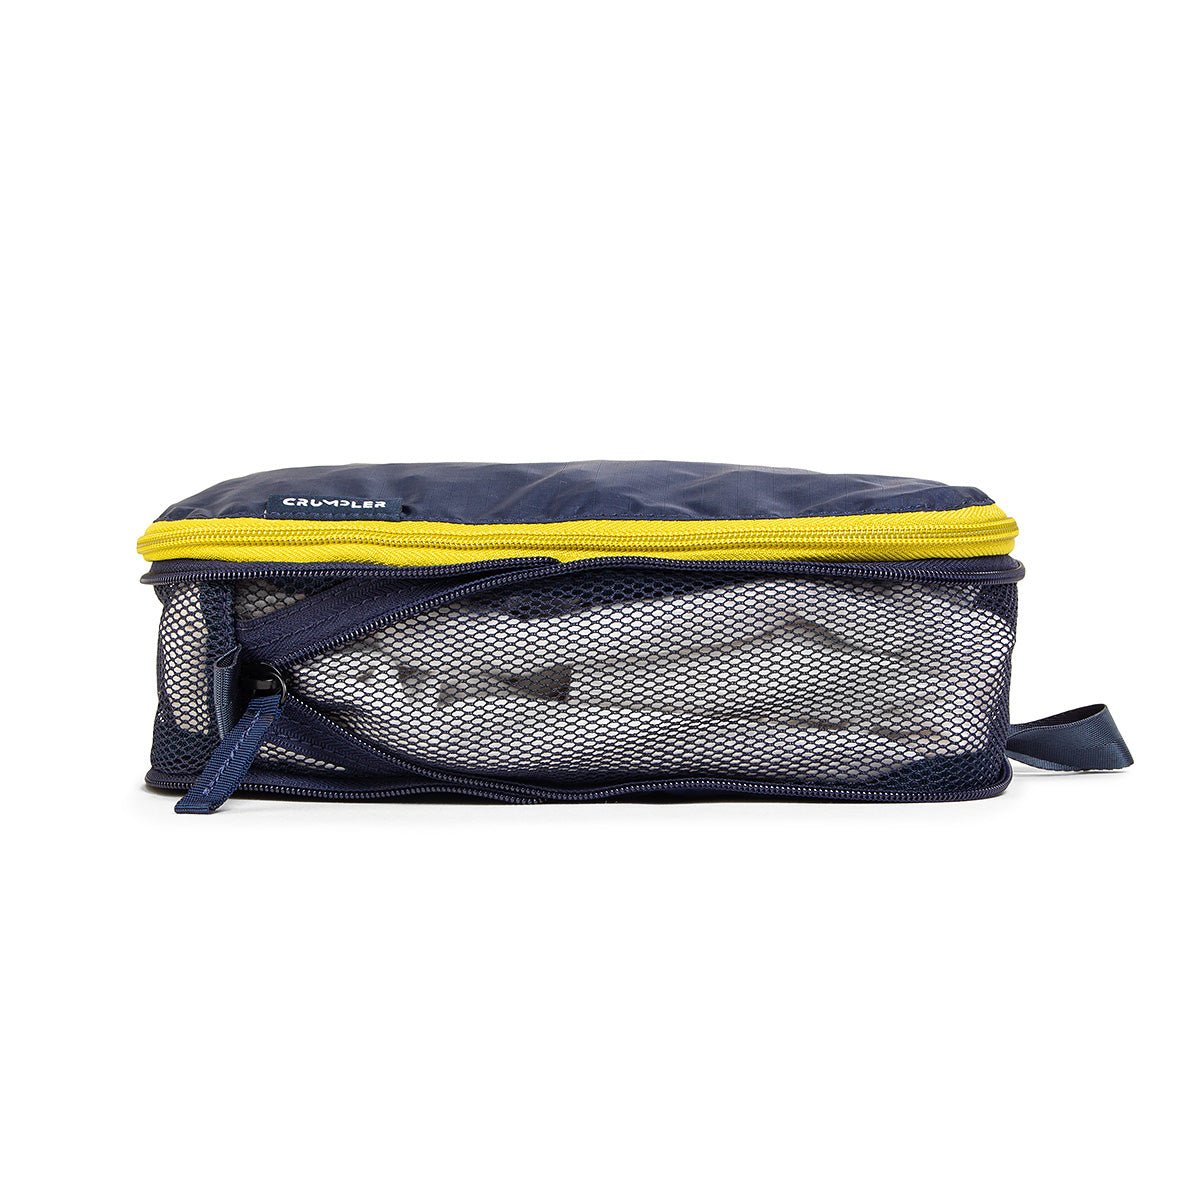 Crumpler The Intern Compression packset (3 pieces) - #product-type#